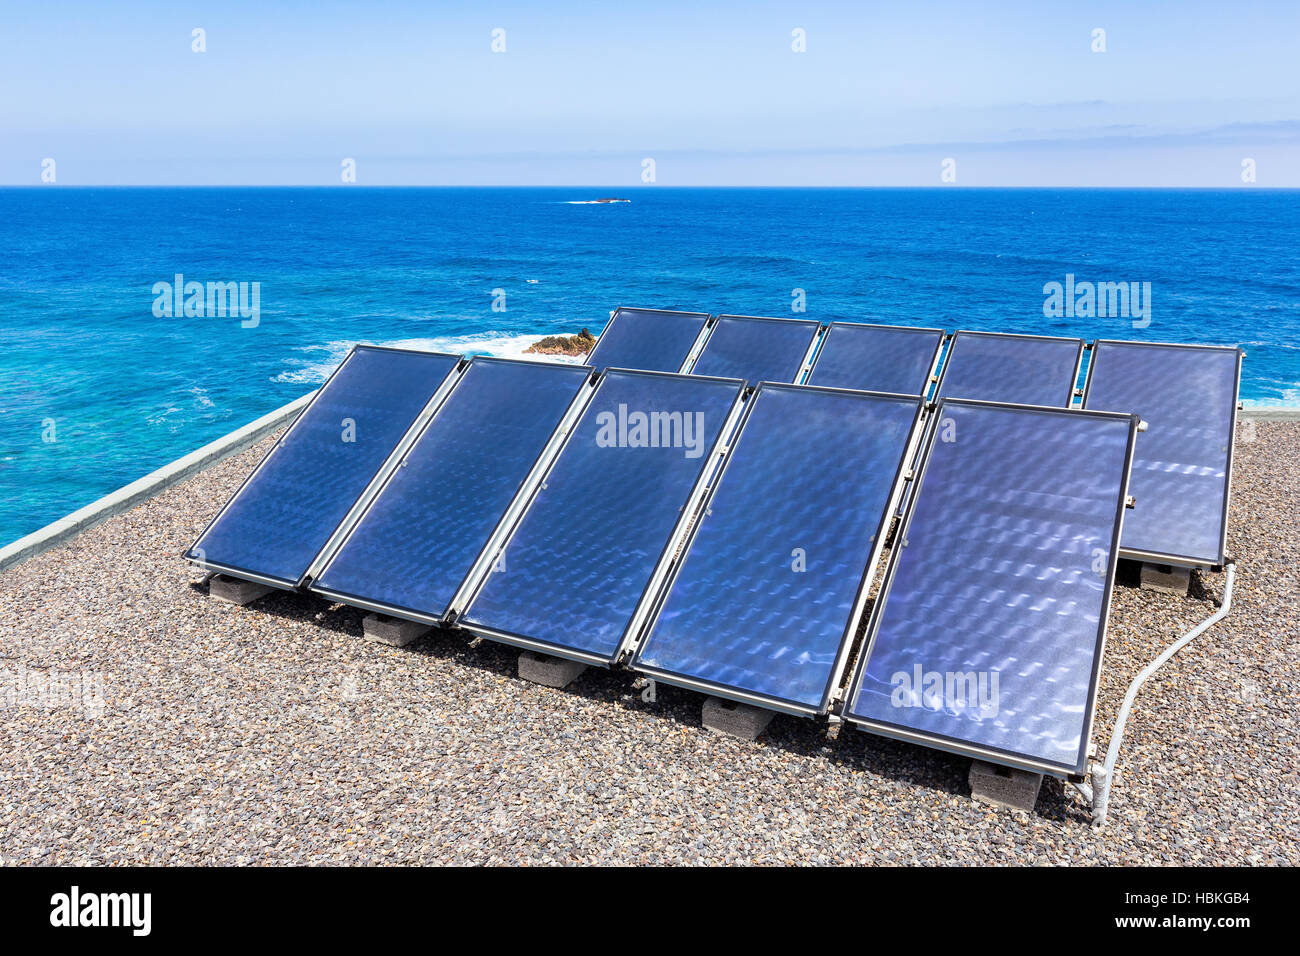 Rows of solar collectors on roof at sea Stock Photo